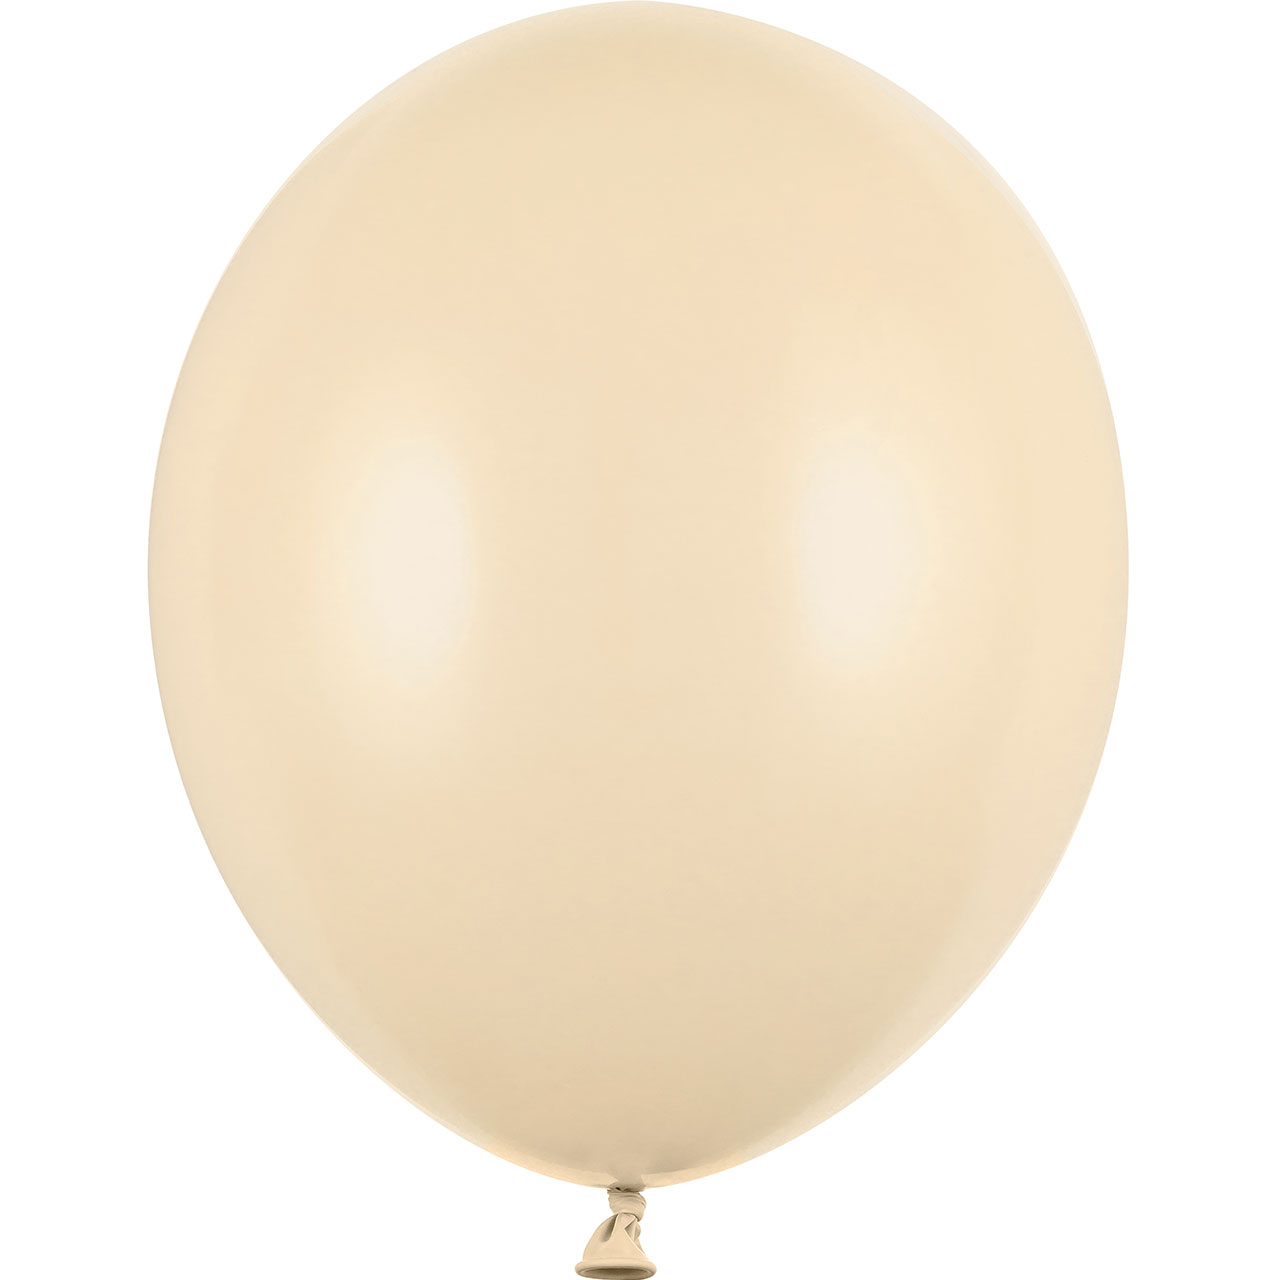 Latexballons - Pastell Alabaster - 30 cm